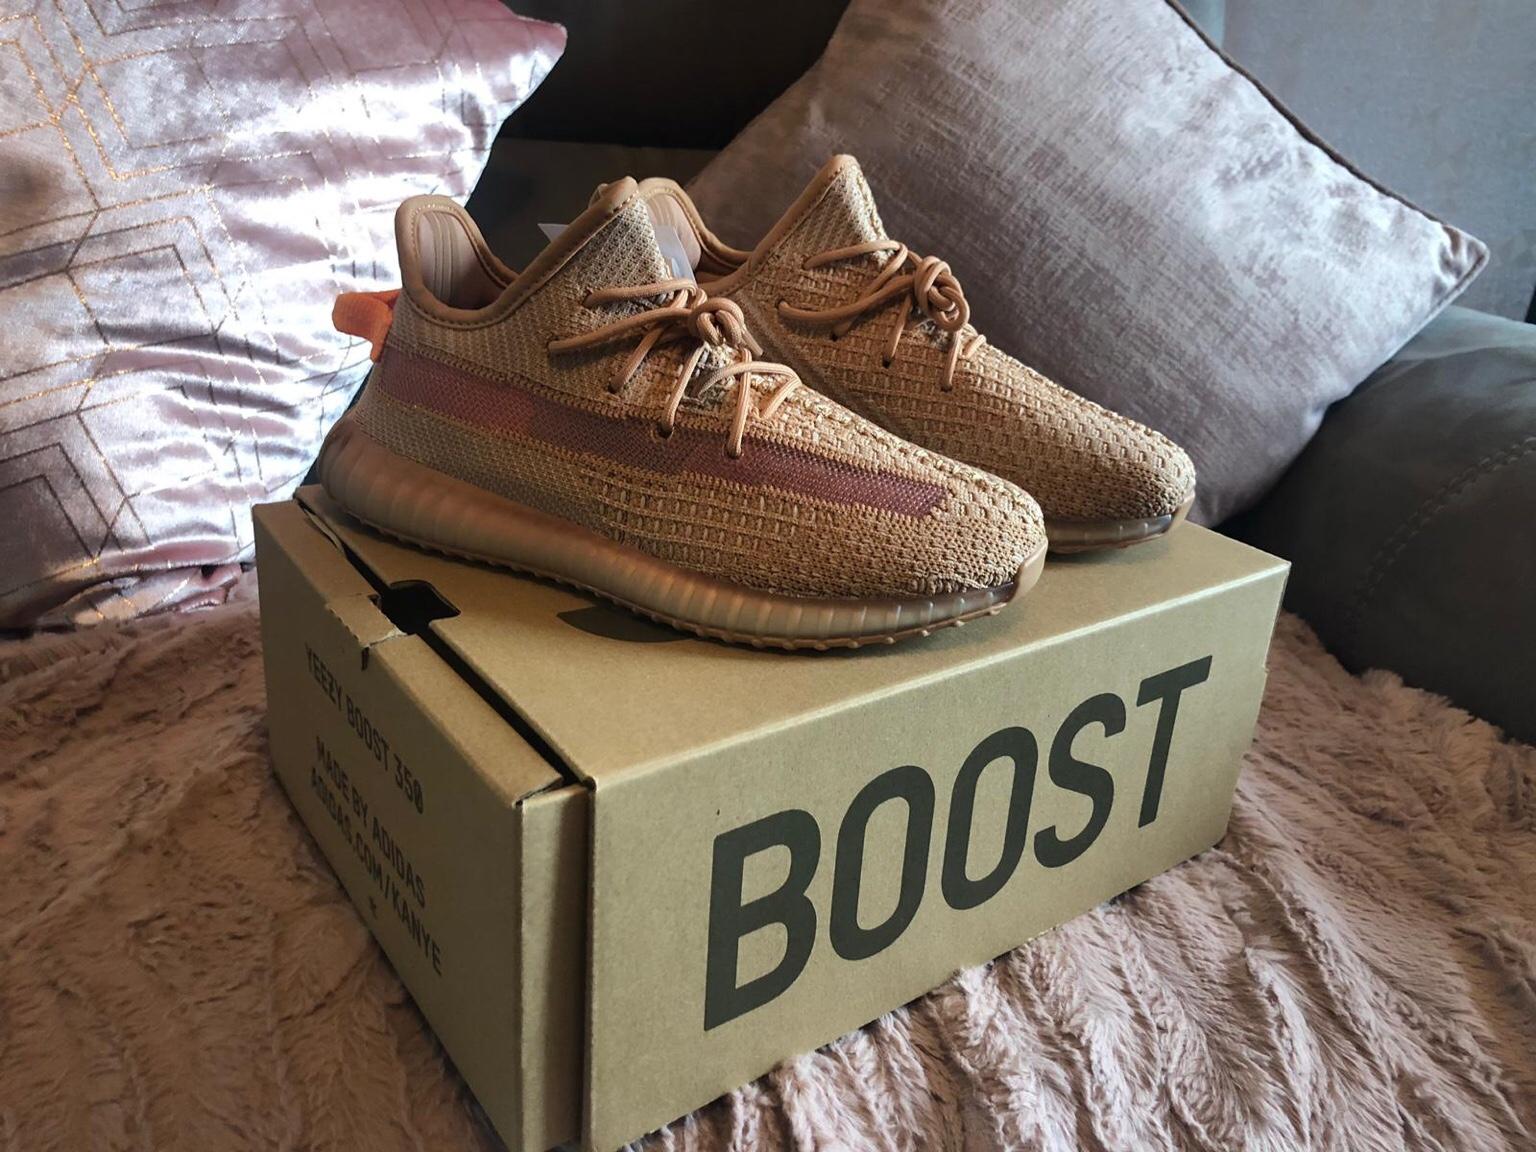 Adidas Yeezy 350 v2 Clay in EH54 